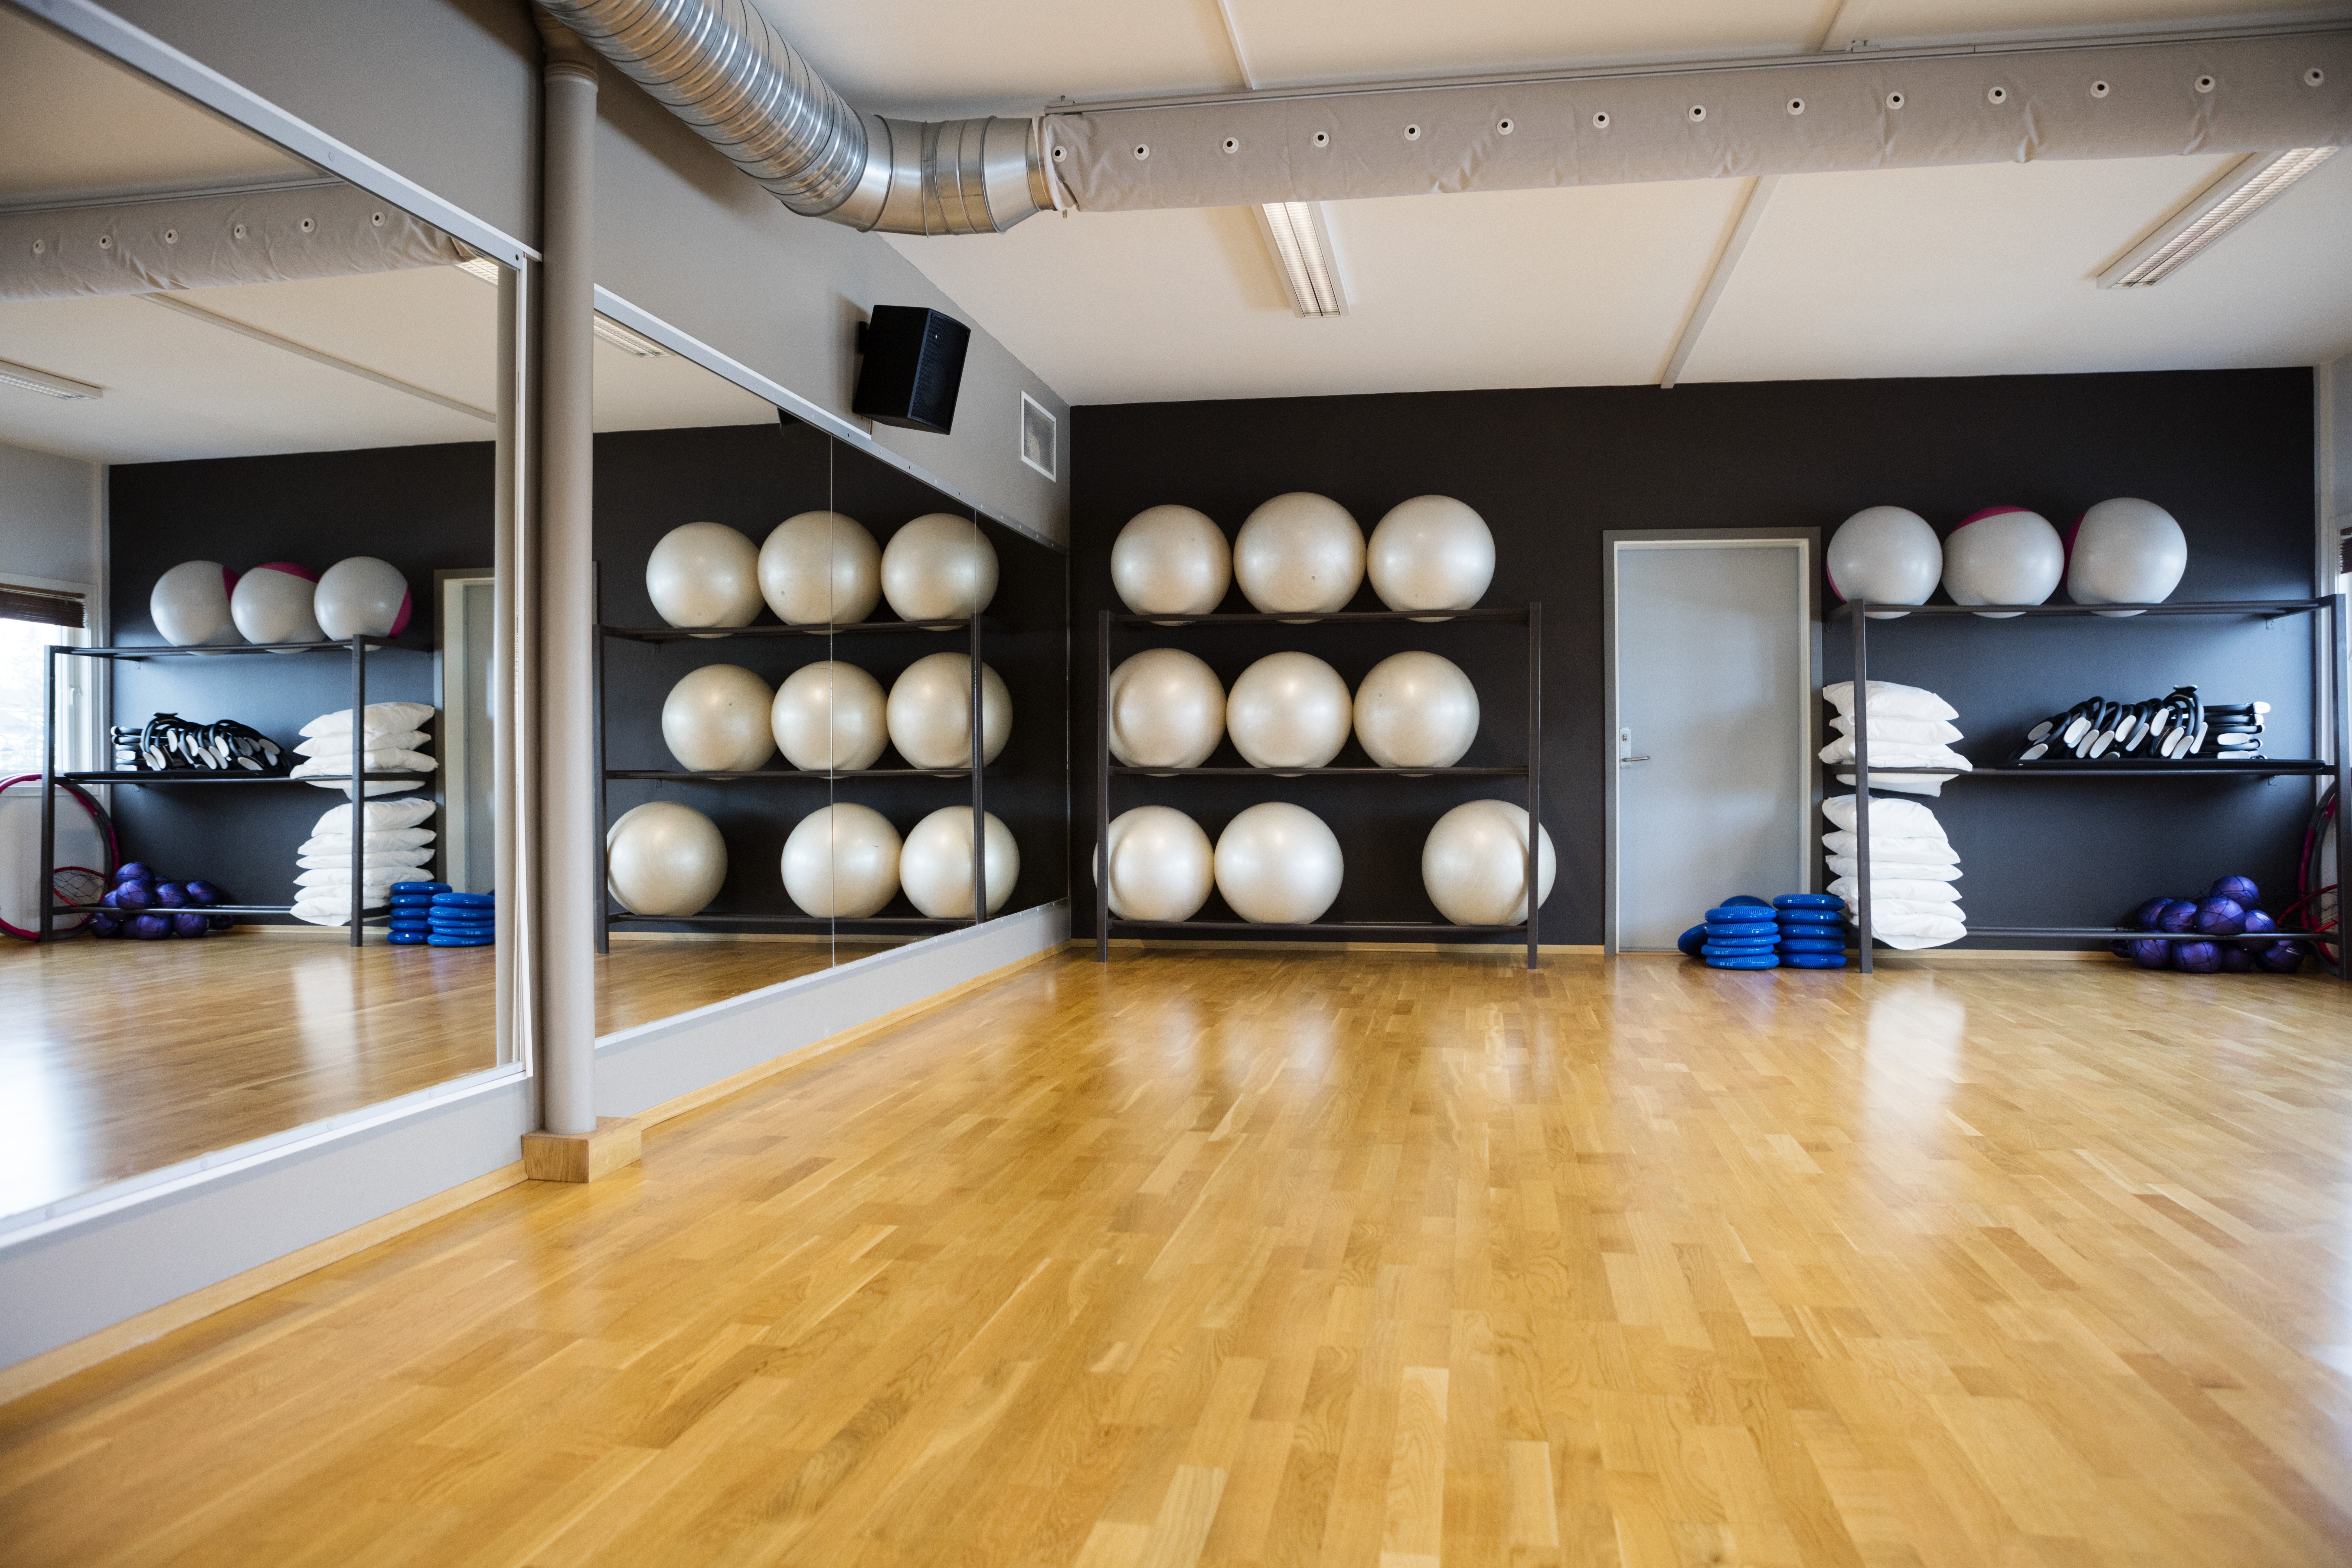 Yes, You Can Use The Fitness Studio When It’s Empty